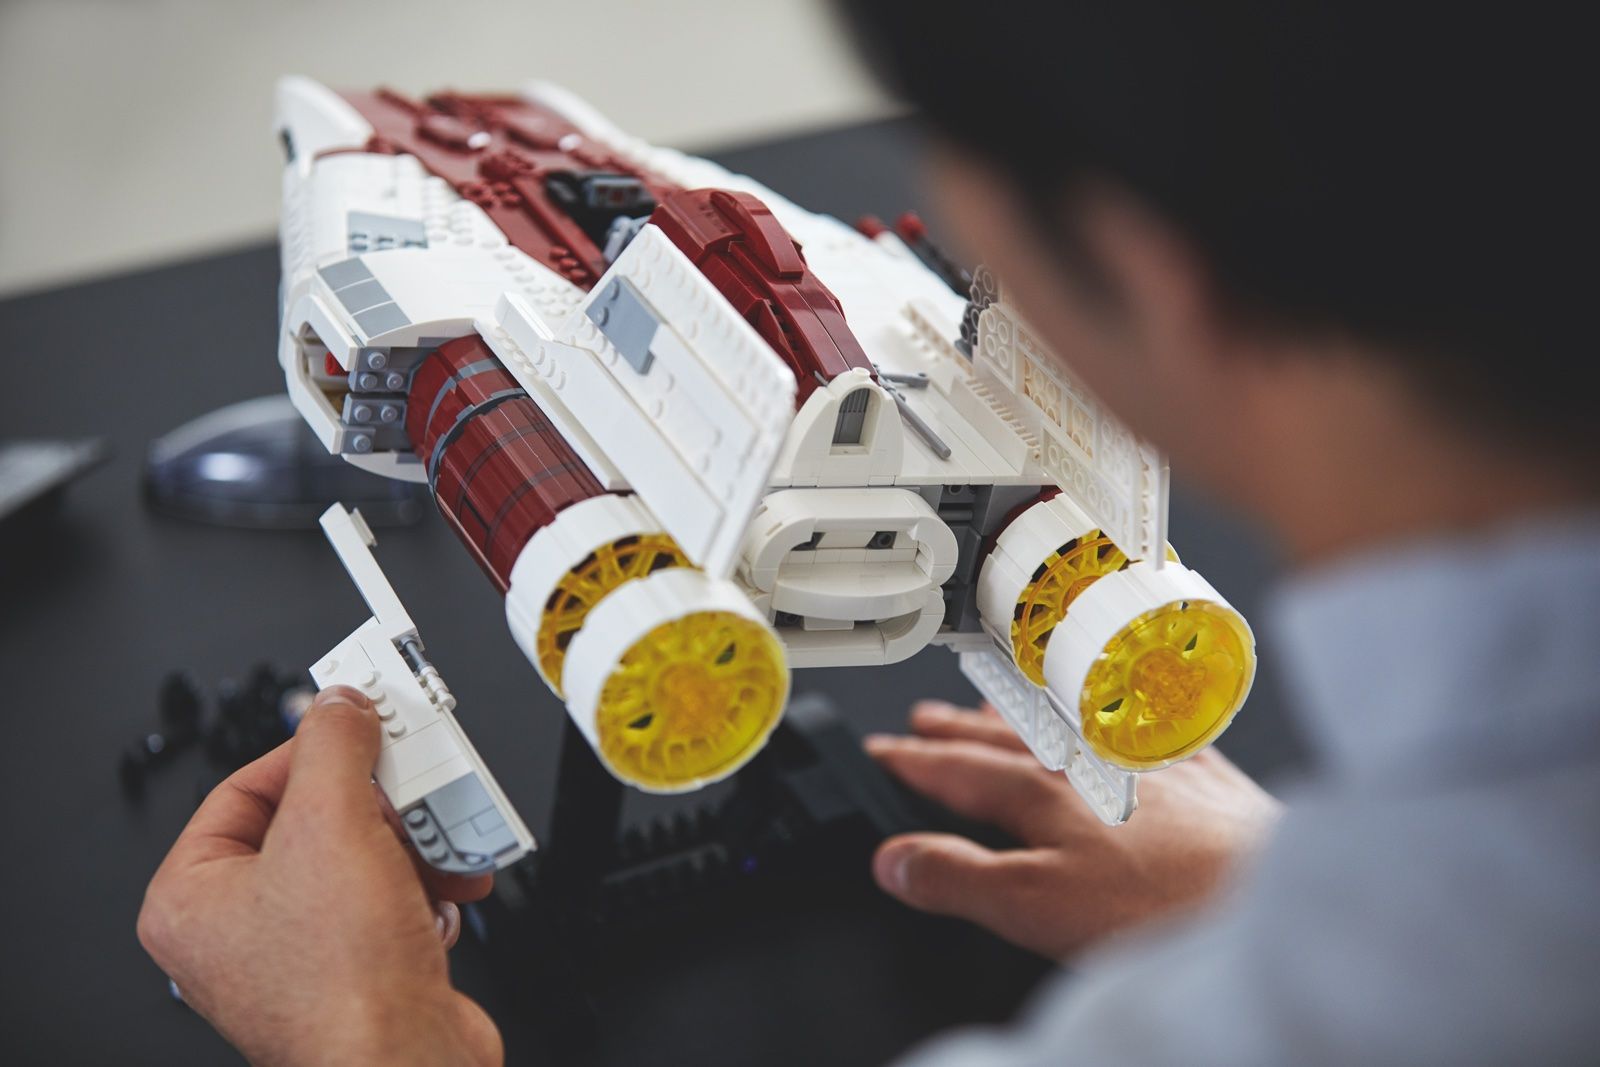 This Lego Star Wars A-Wing is the latest in the Ultimate Collectors Series image 1